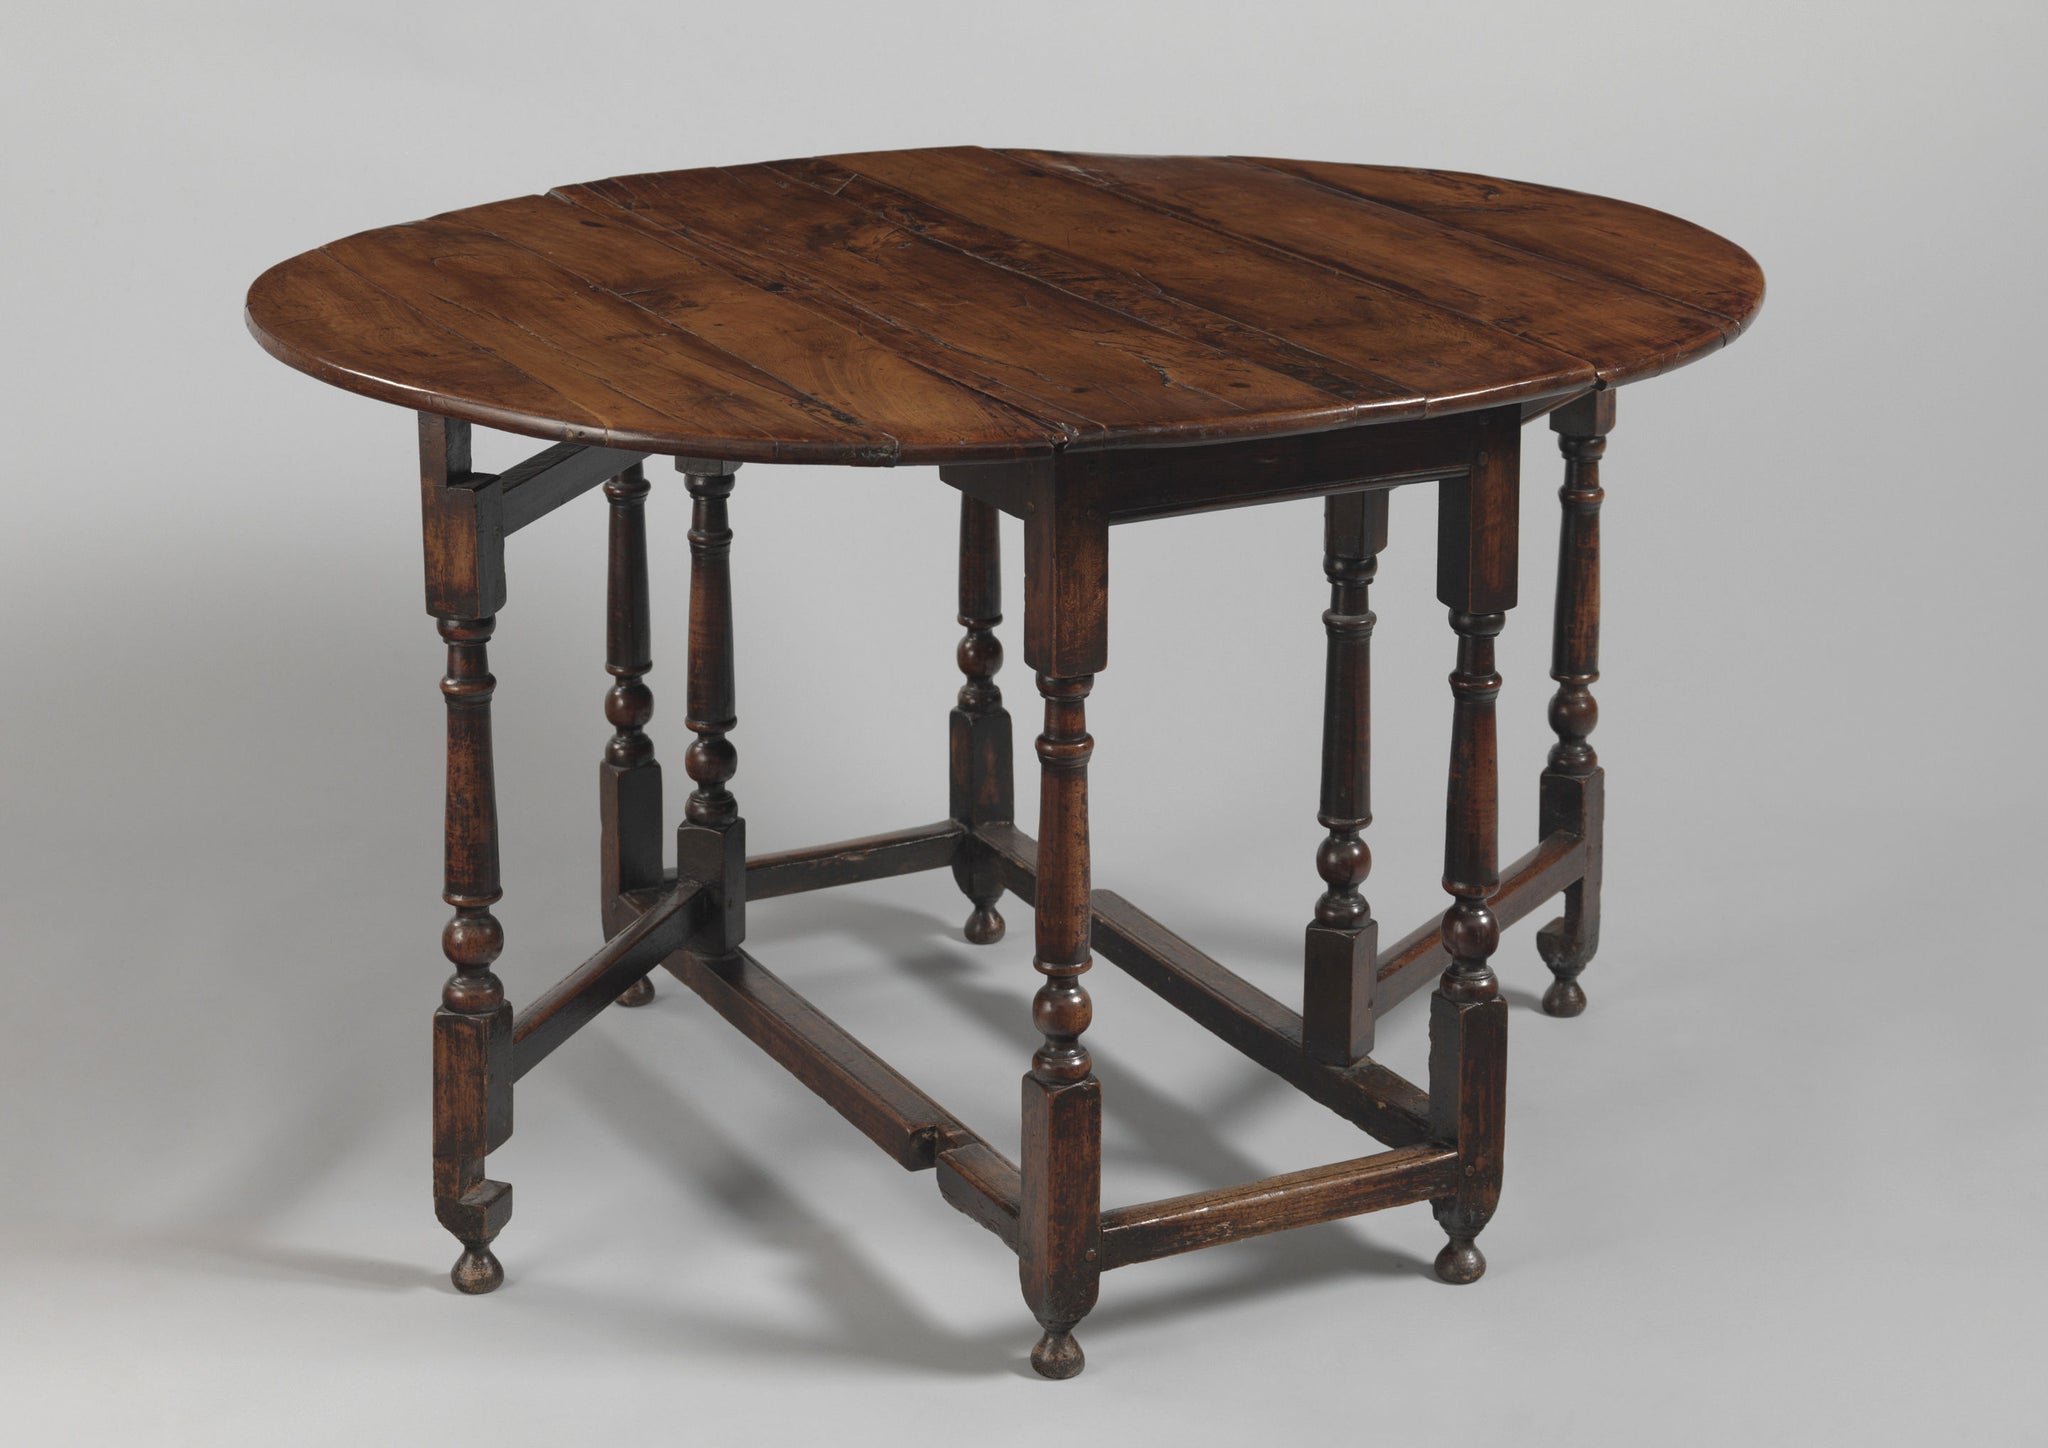 William and Mary Period Oval Table.